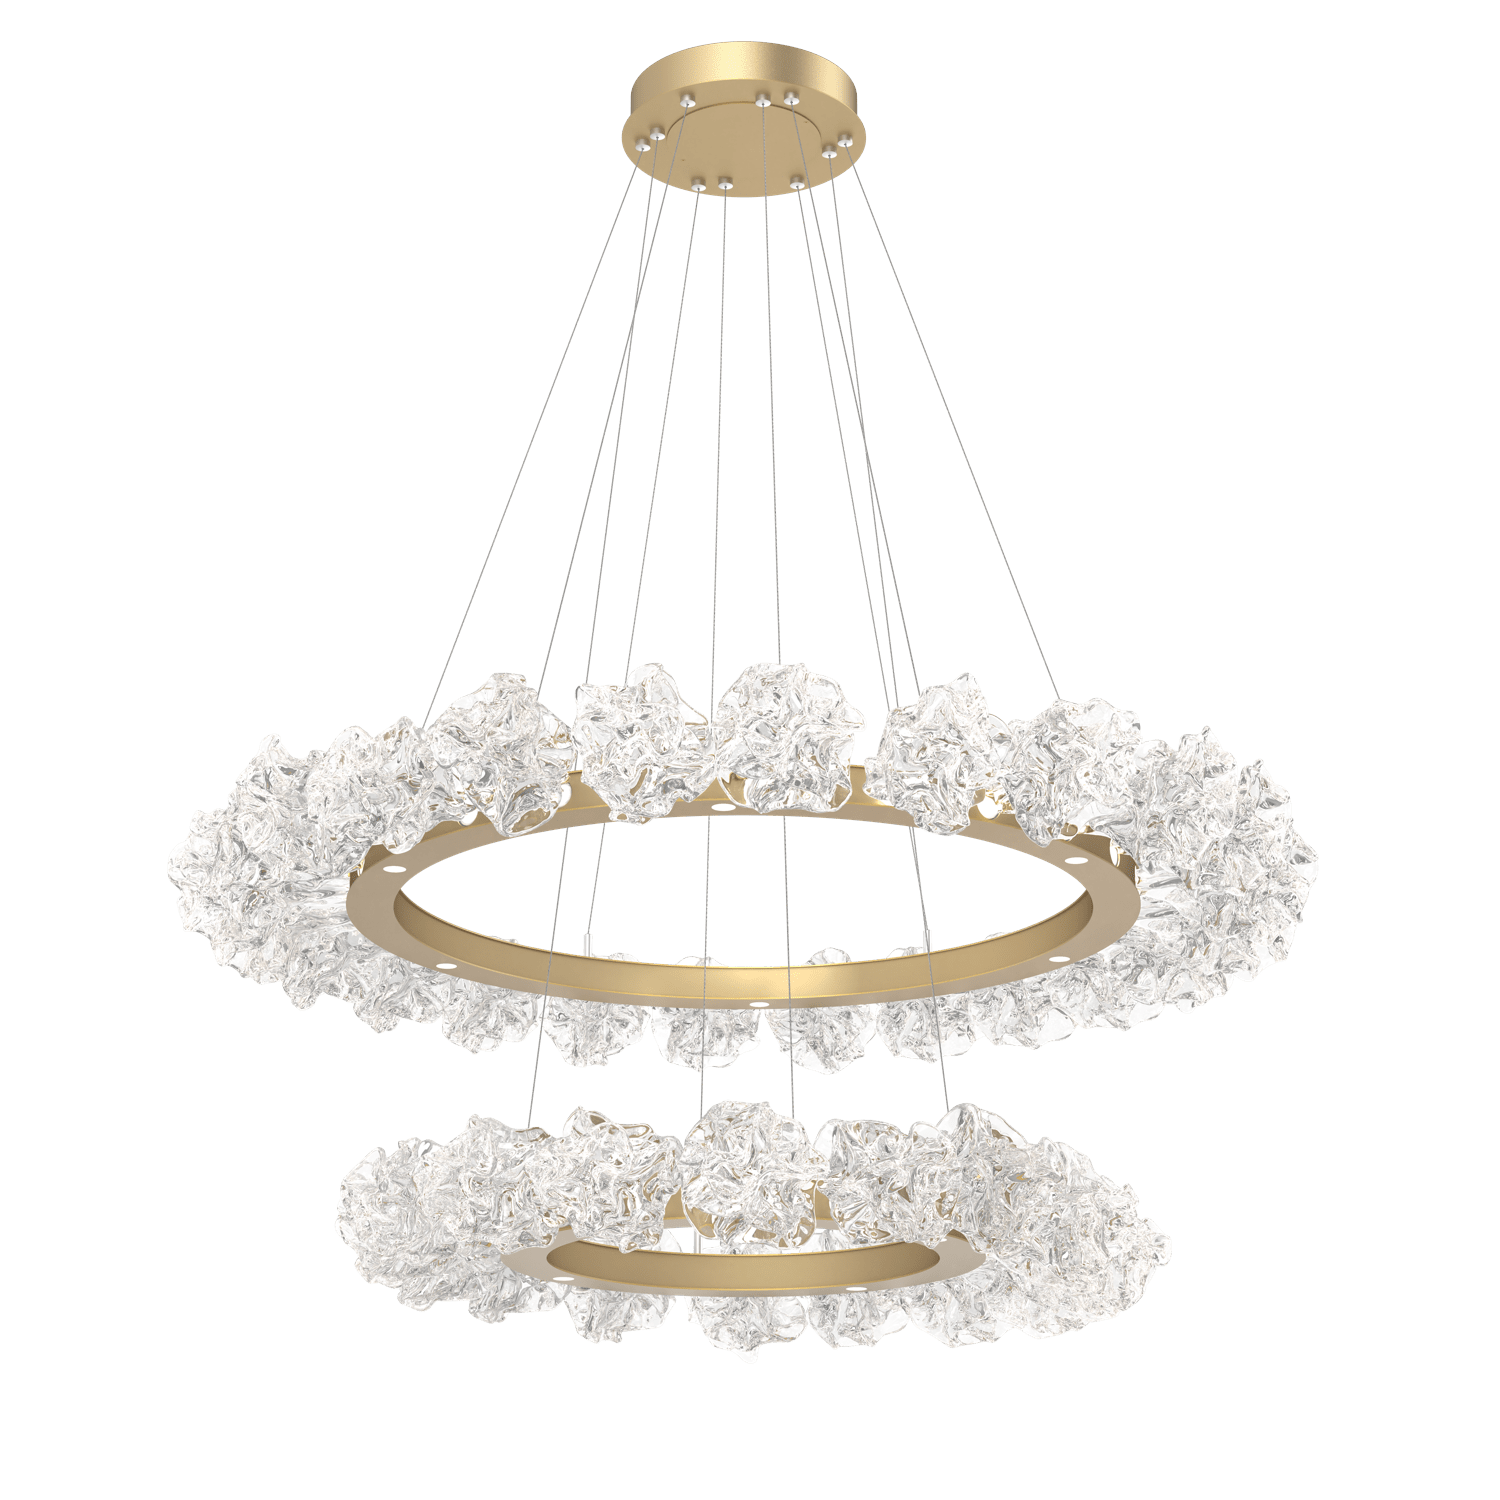 CHB0059-2B-GB-Hammerton-Studio-Blossom-50-inch-two-tier-radial-ring-chandelier-with-gilded-brass-finish-and-clear-handblown-crystal-glass-shades-and-LED-lamping